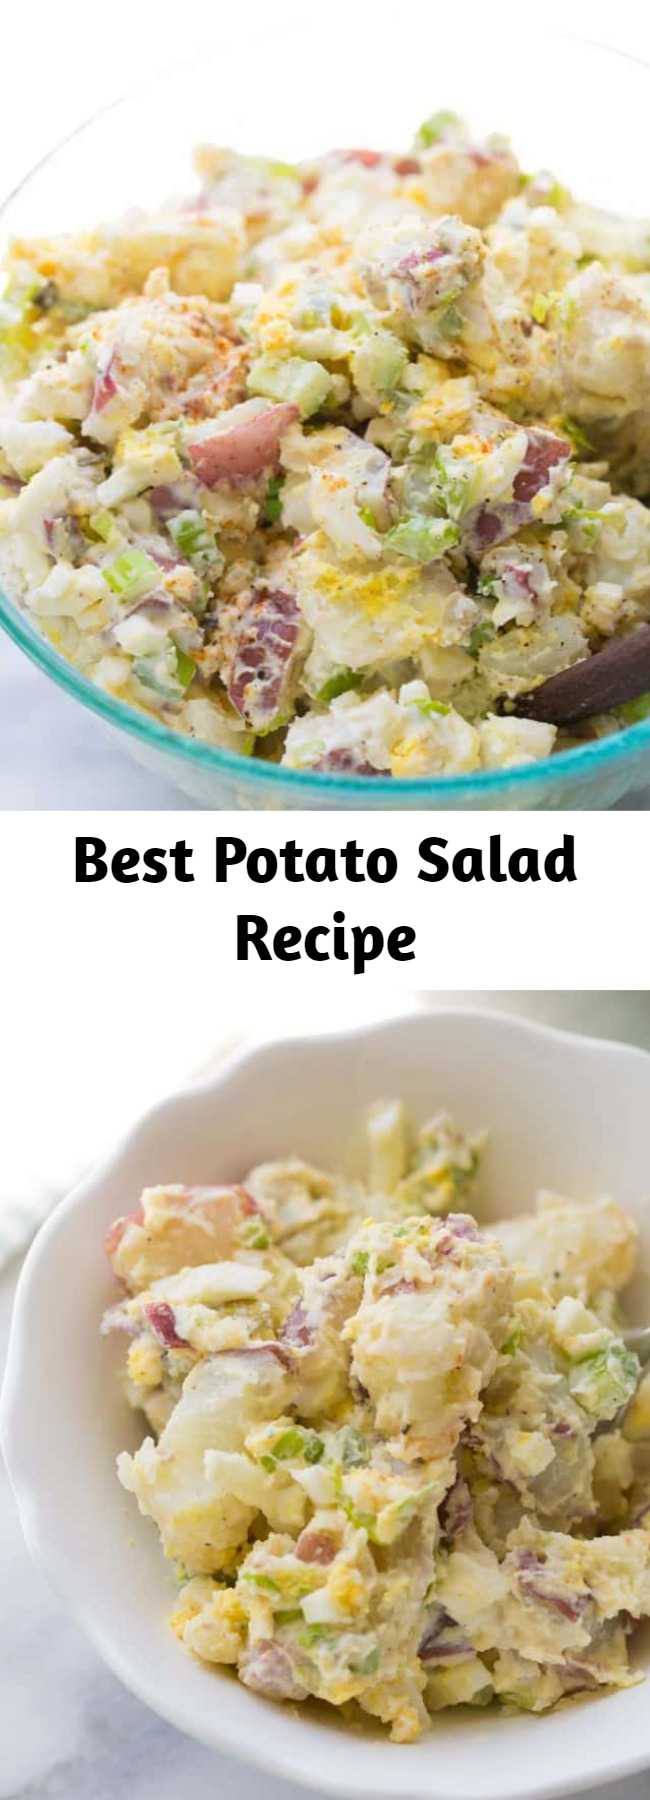 Best Potato Salad Recipe - The BEST ever potato salad! Everyone always asks for this recipe. Such a crowd-pleaser! The trick that makes this potato salad extra delicious is mixing the warm potatoes with a vinegar/salt/sugar mixture. This helps the flavor to go inside the potatoes, making this potato salad extra flavorful! #potatosalad #bbqsides #glutenfree #potatosaladrecipe #bestpotatosalad